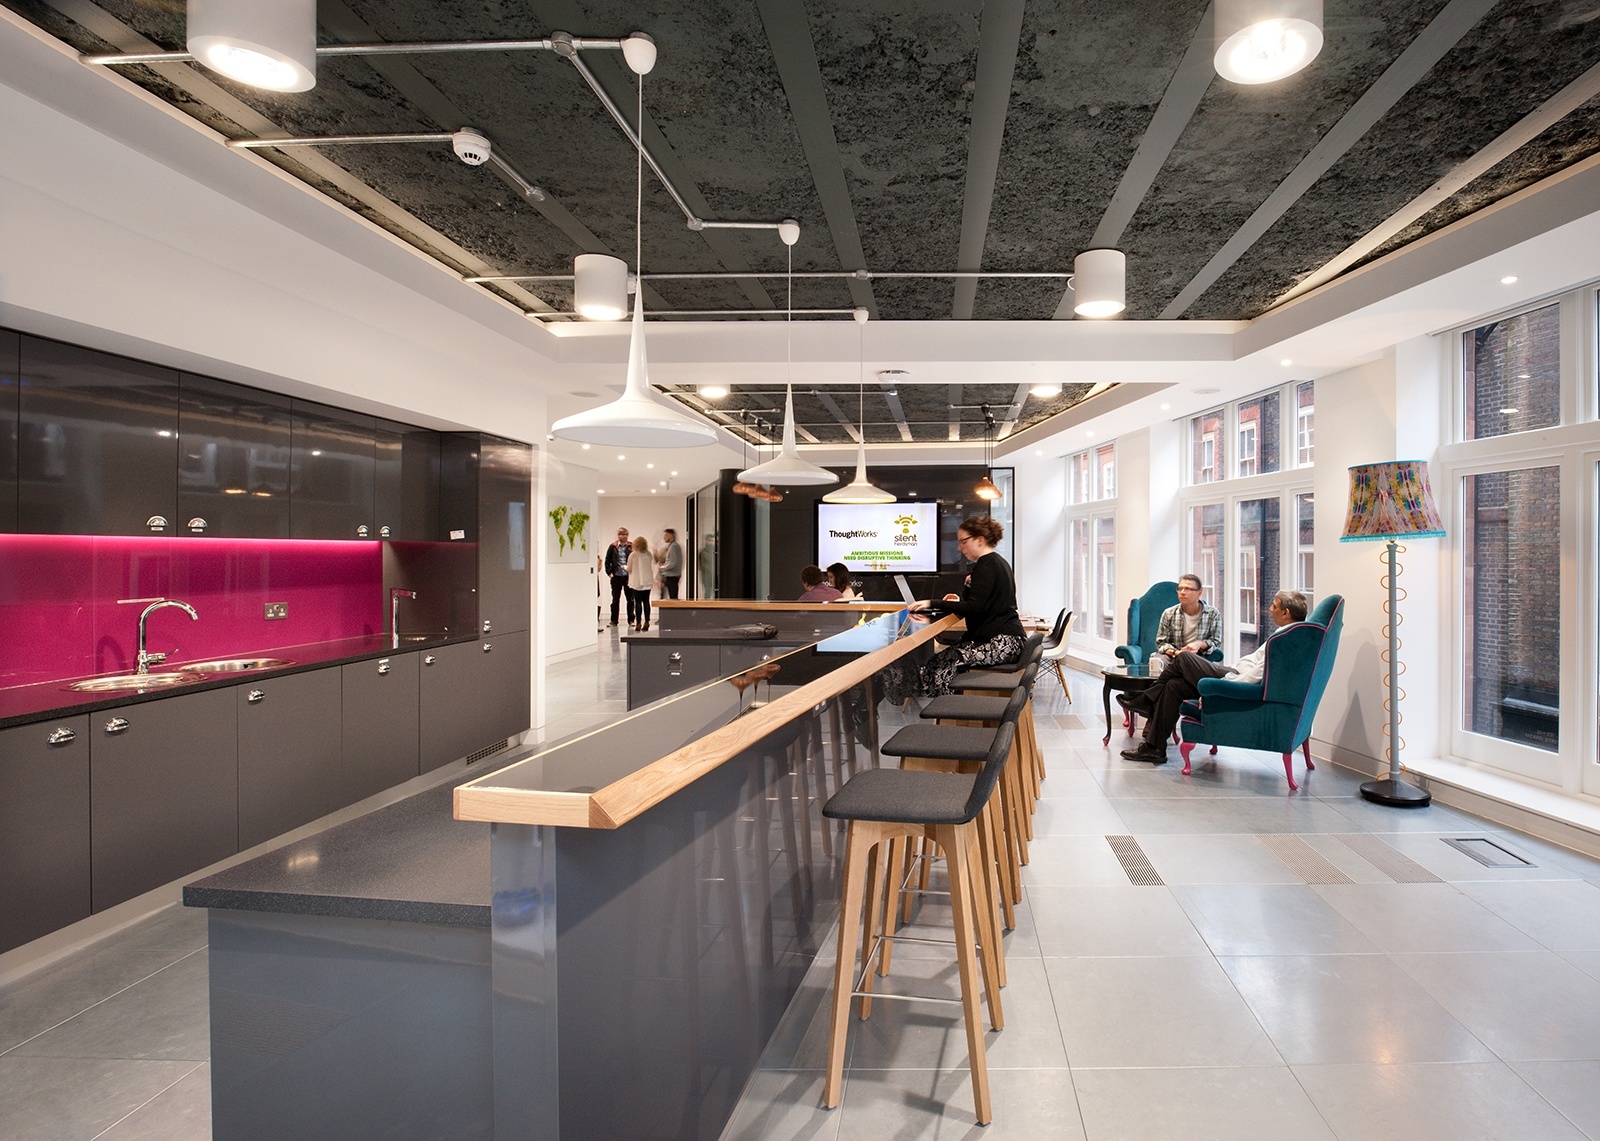 A Look Inside ThoughtWorks’ Cool London Office - Officelovin'